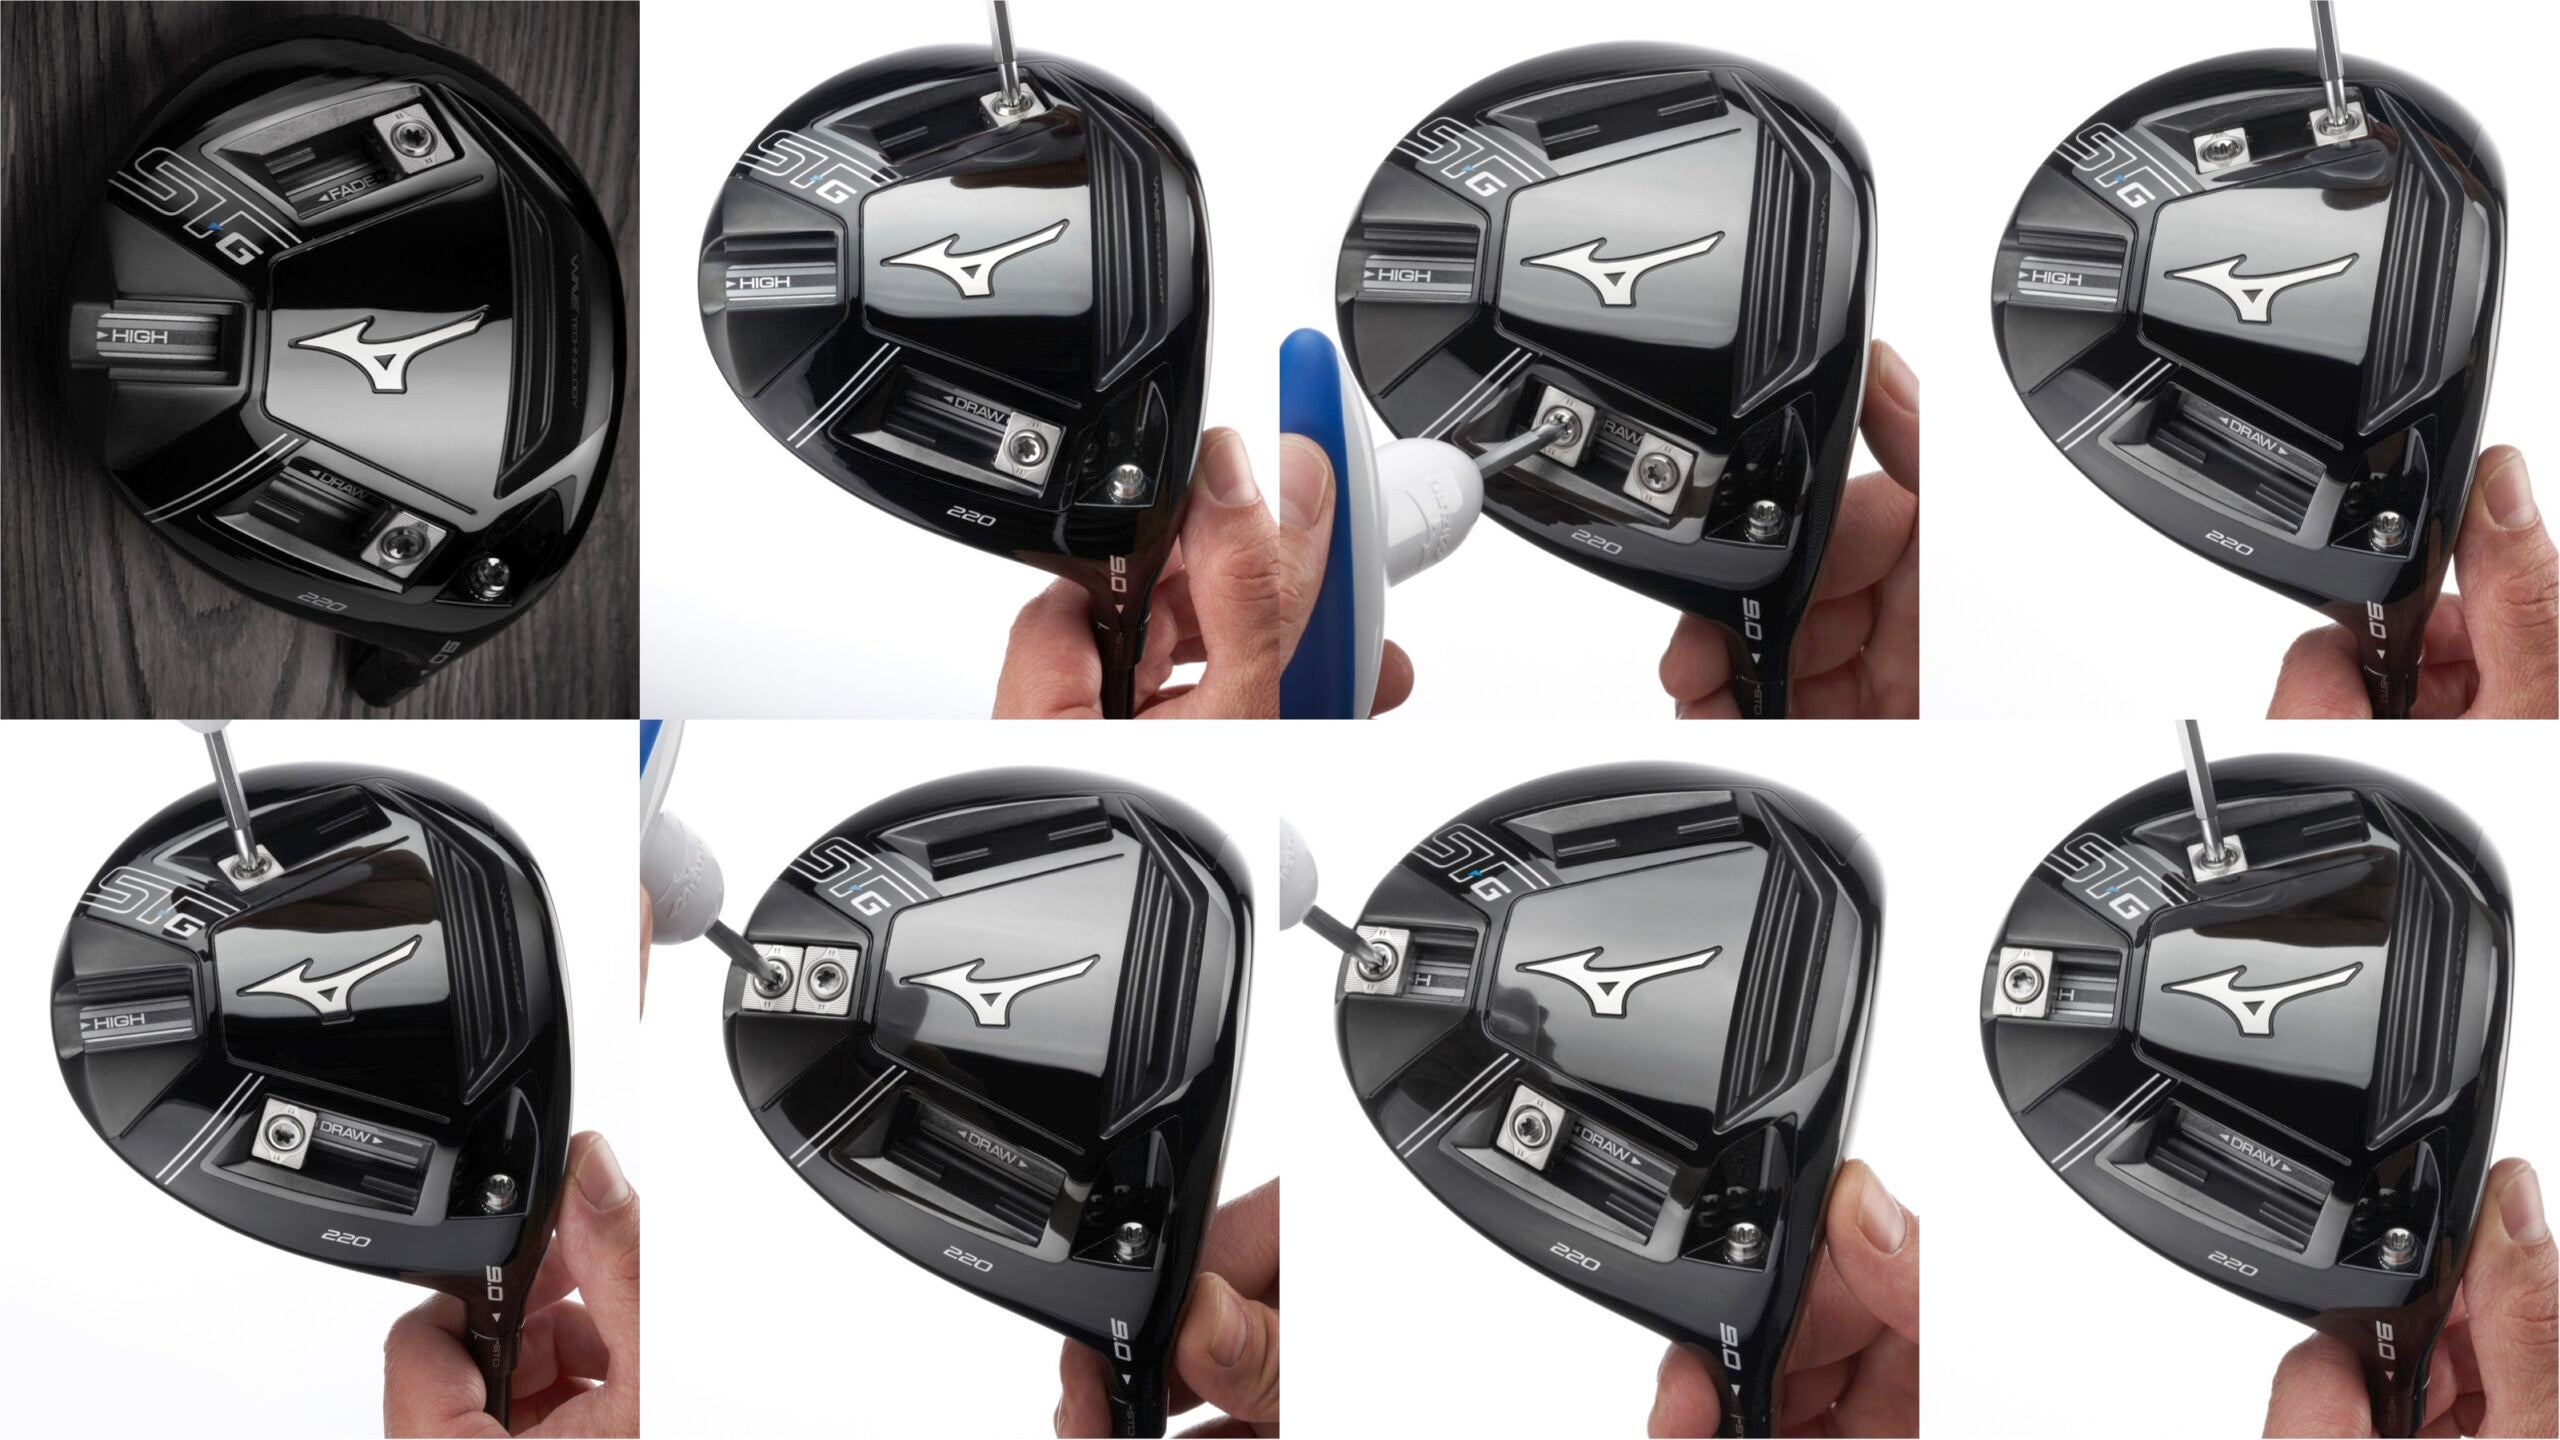 FIRST LOOK: Mizuno's new ST-G 220 driver, made for ultra adjustability